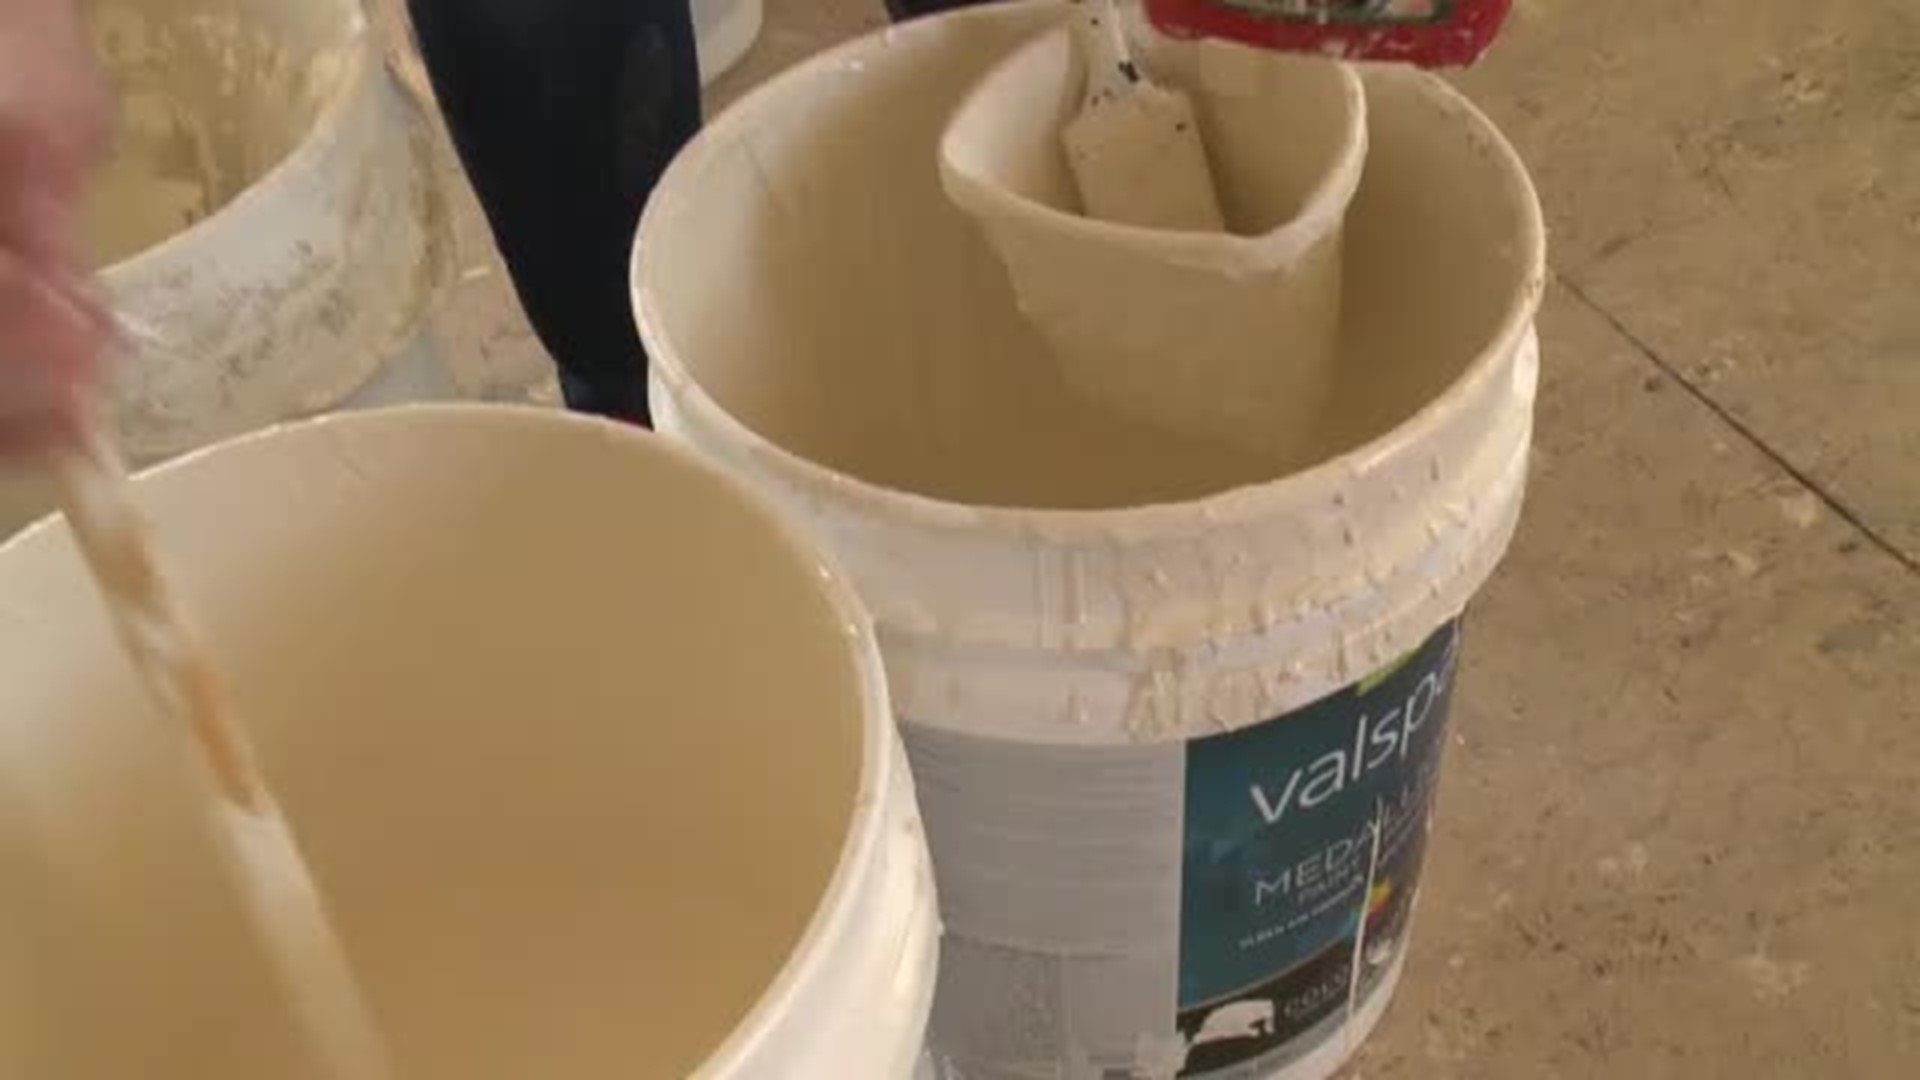 Local corporation teams up with Habitat for Humanity in Hartford